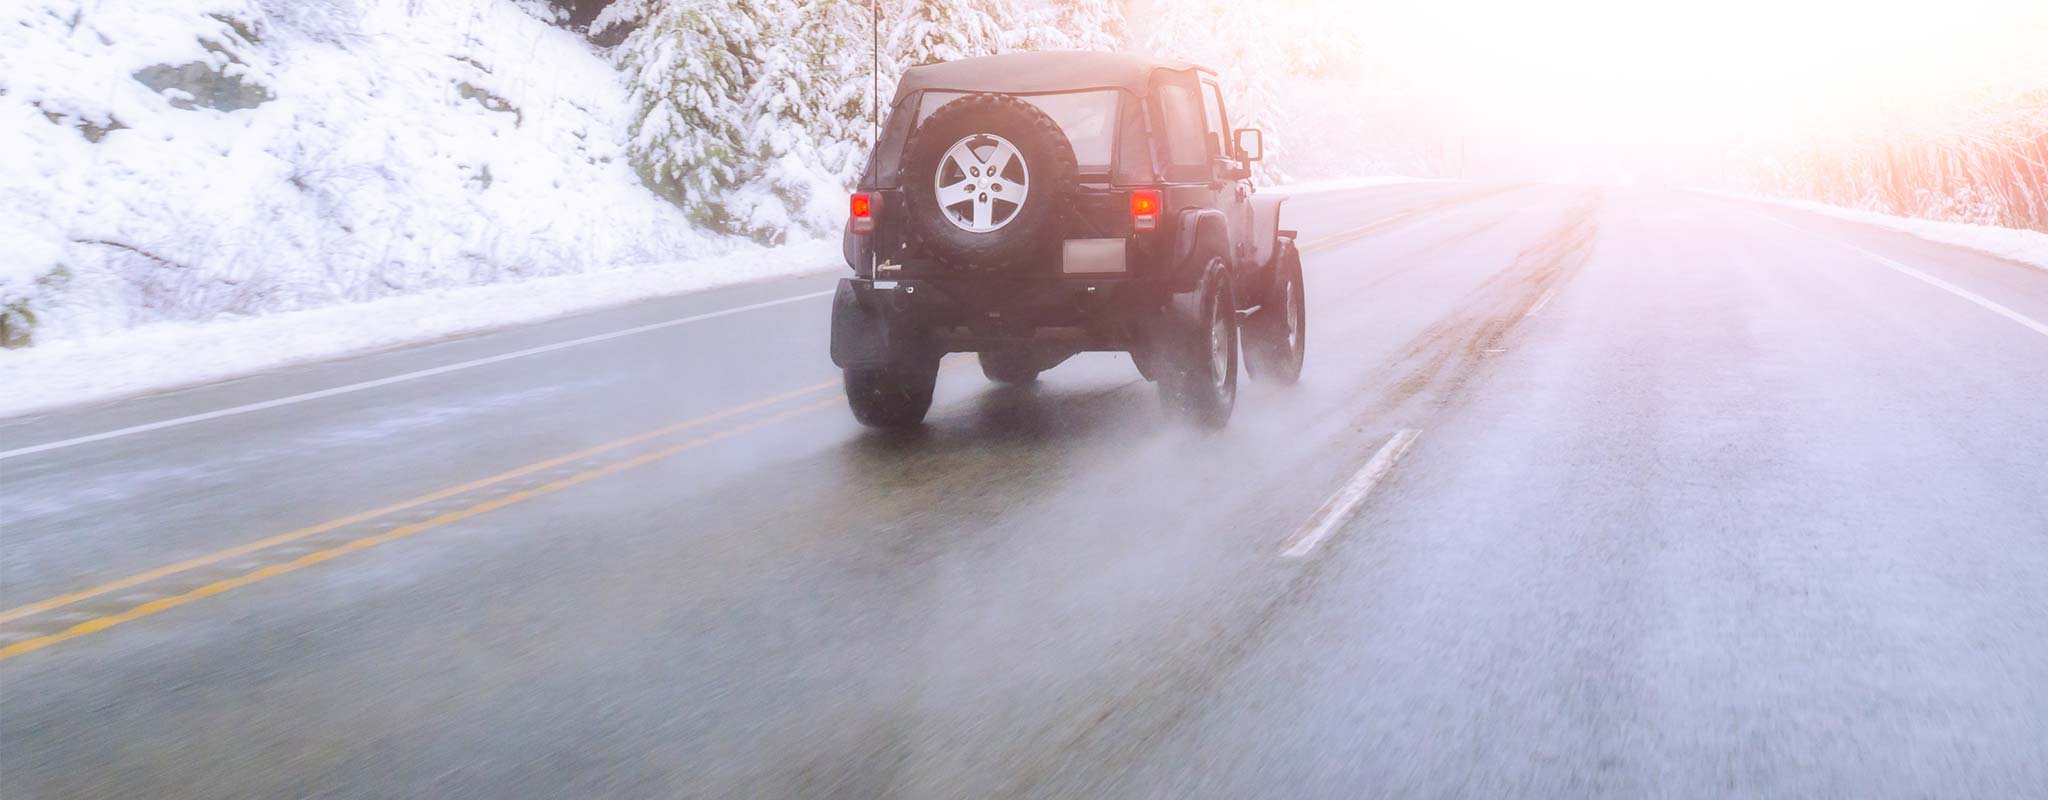 Jeep driving down winter roadway.